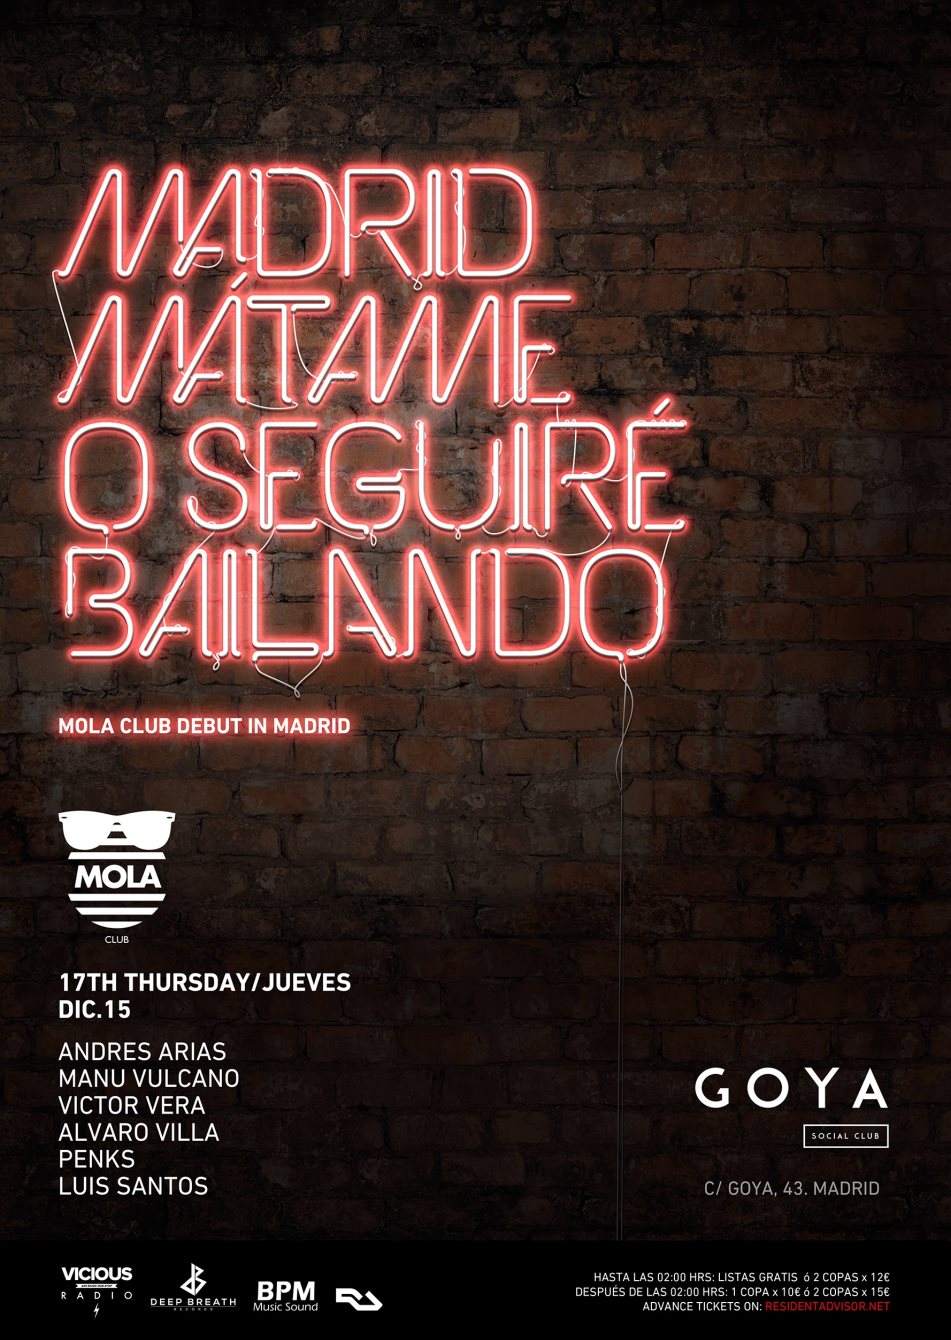 Mola Club Debut in Madrid - フライヤー表